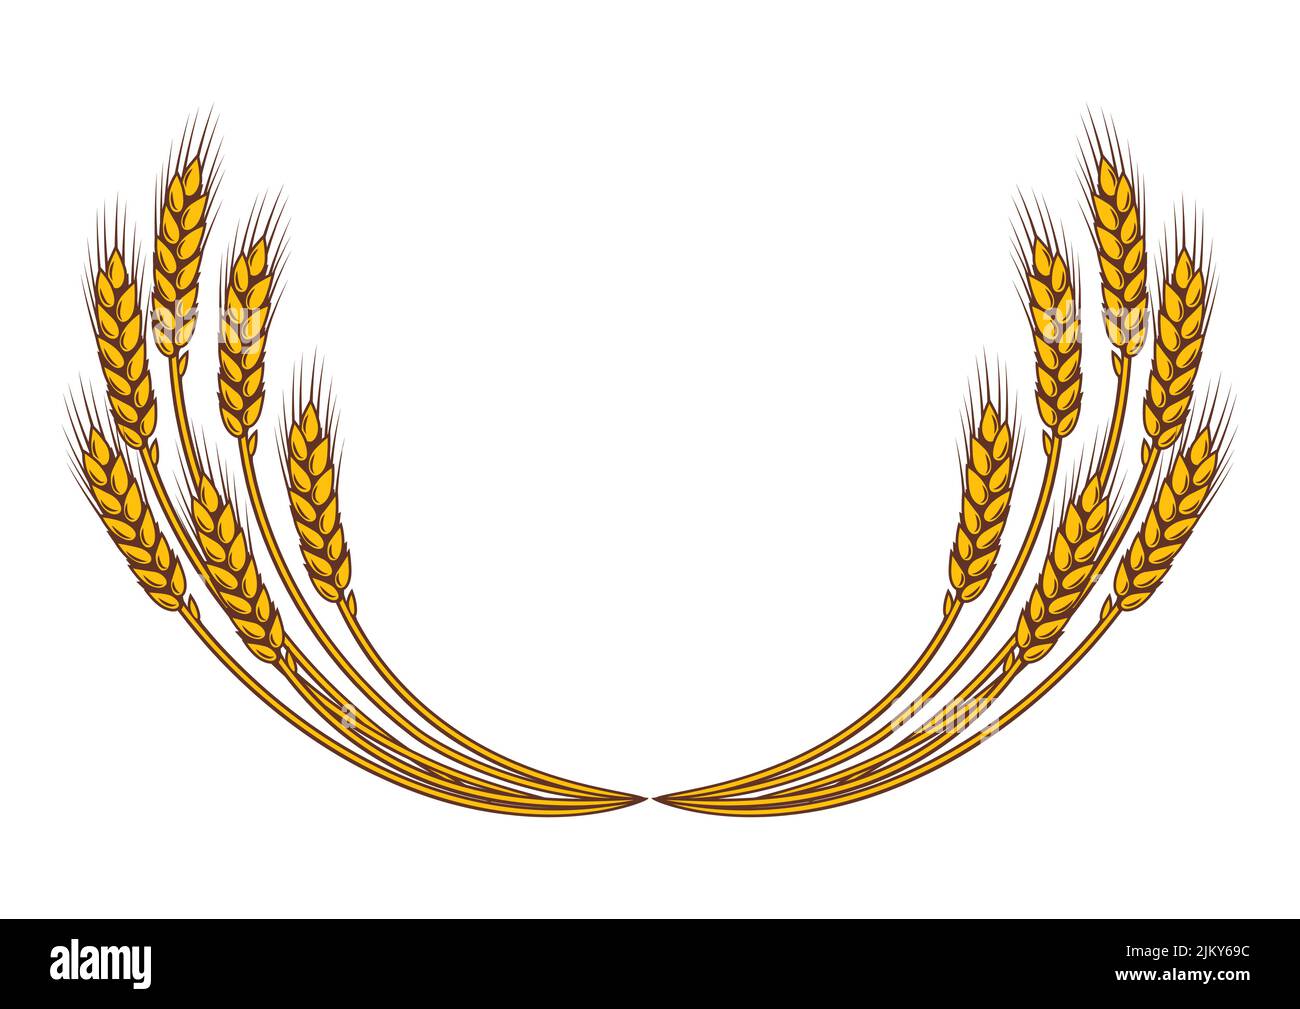 Bunch of wheat. Agricultural image with natural golden ears of barley or rye. Stock Vector